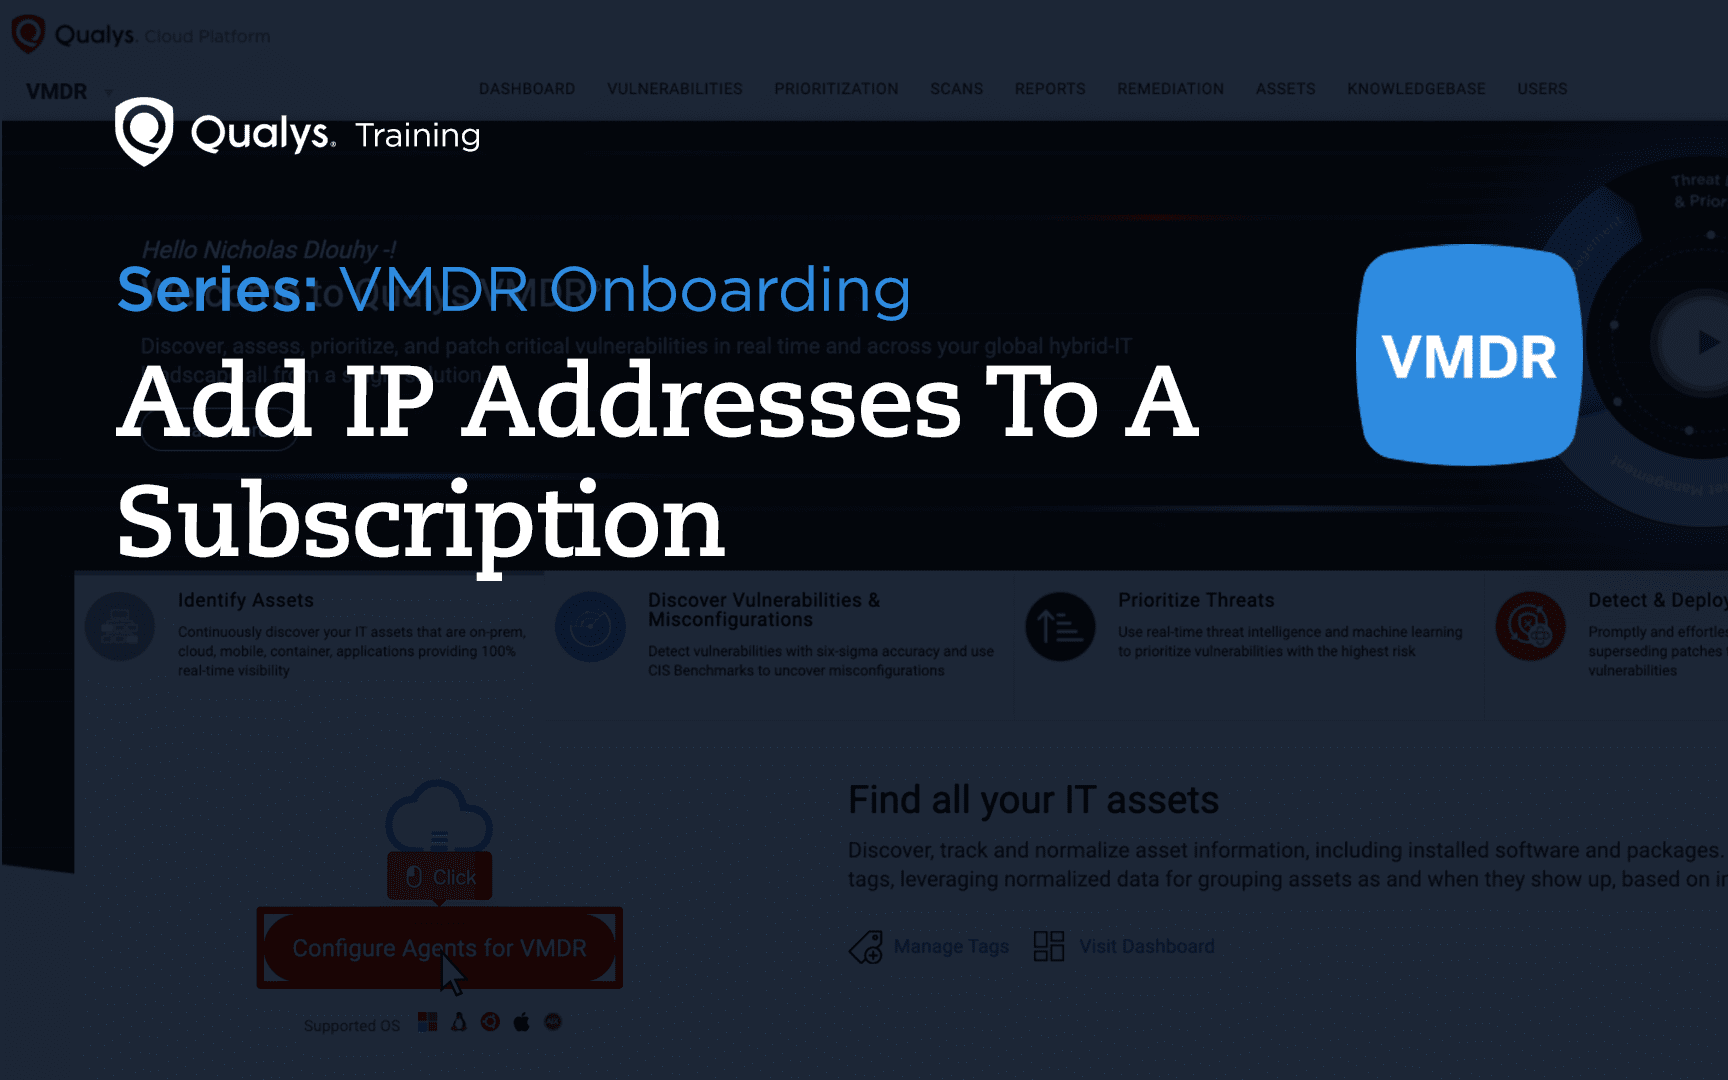 Add IP Addresses To a Subscription